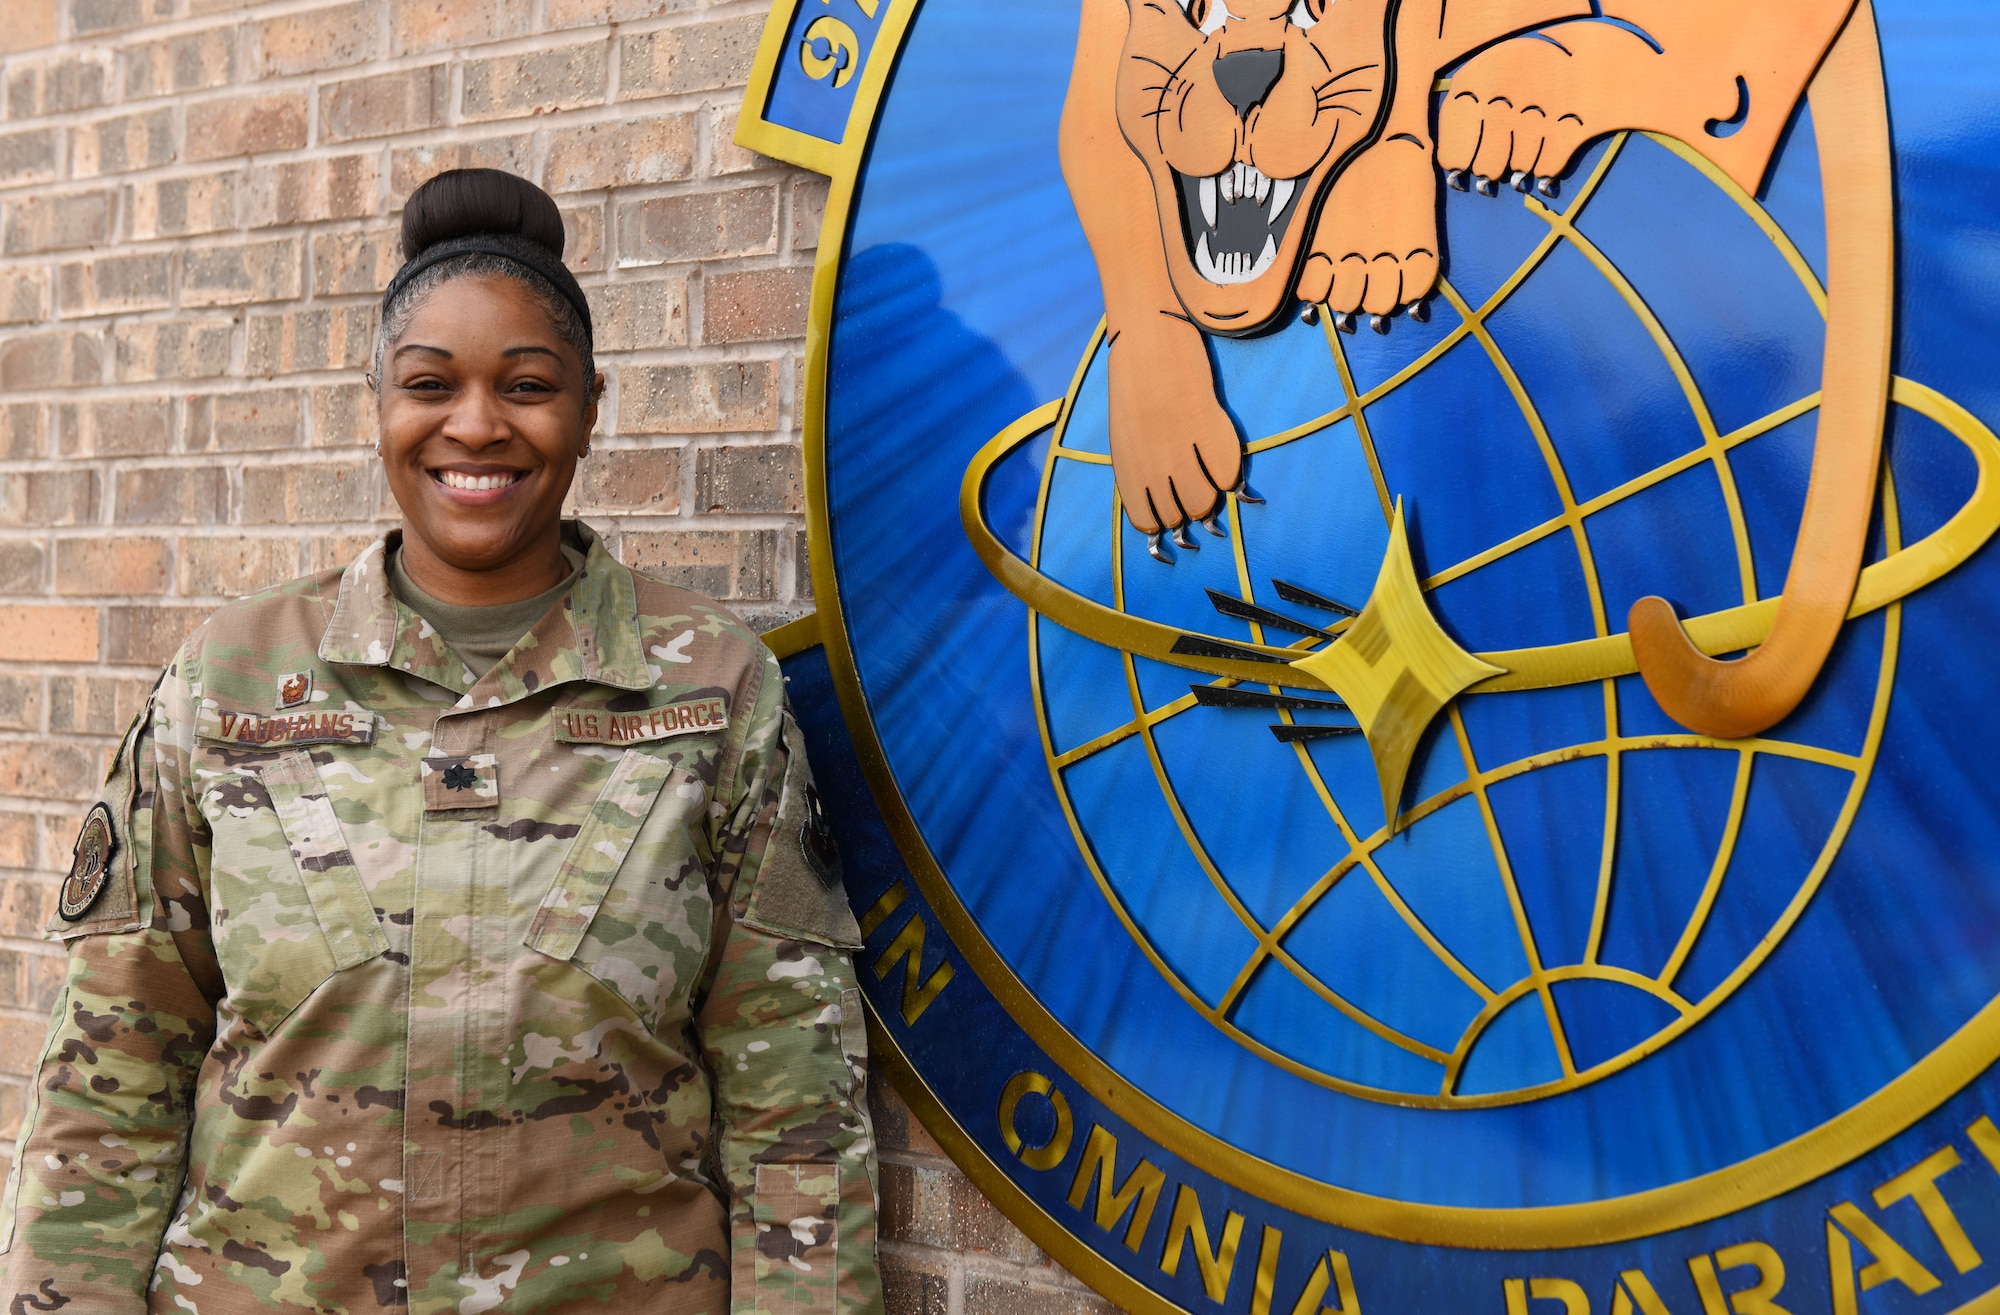 Lt. Col. Marshalria Vaughans, 97th Communications Squadron (CS) commander, stands next to the 97th CS logo on Jan. 20, 2020, at Altus Air Force Base, Oklahoma. Vaughans applied to transfer into the U.S. Space Force in May of 2020 and learned she’d been accepted in October of 2020. She is slated to become one of 150 cyber officers in the entire branch. (U.S. Air Force photo by Airman 1st Class Amanda Lovelace)